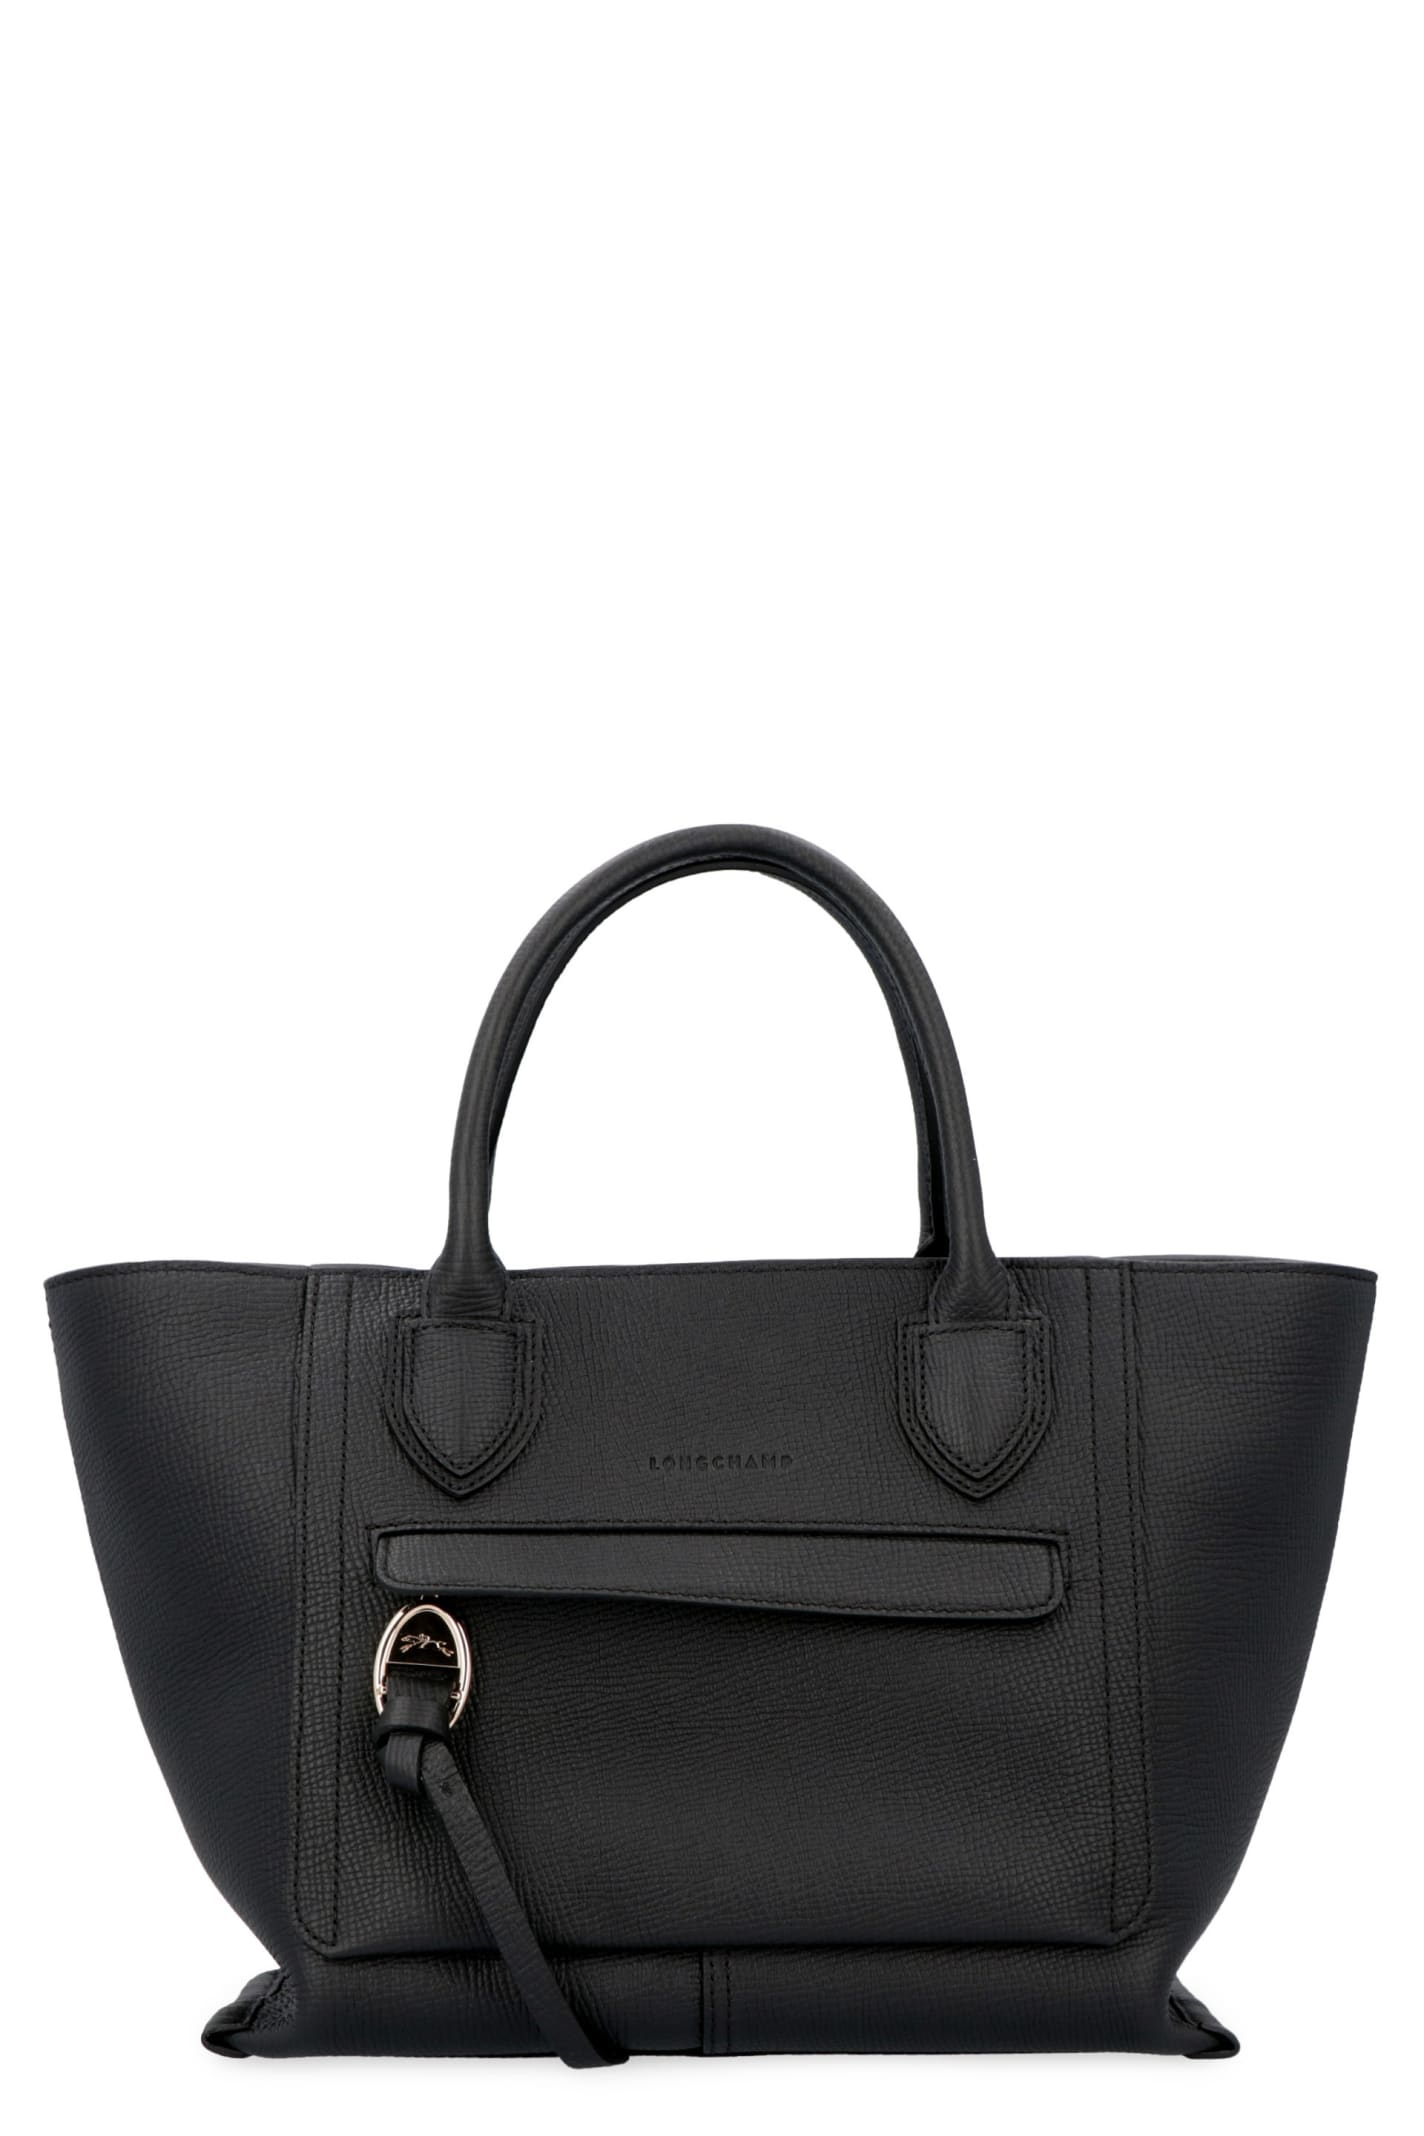 Longchamp Large Mailbox Leather Top Handle Bag In Black | ModeSens